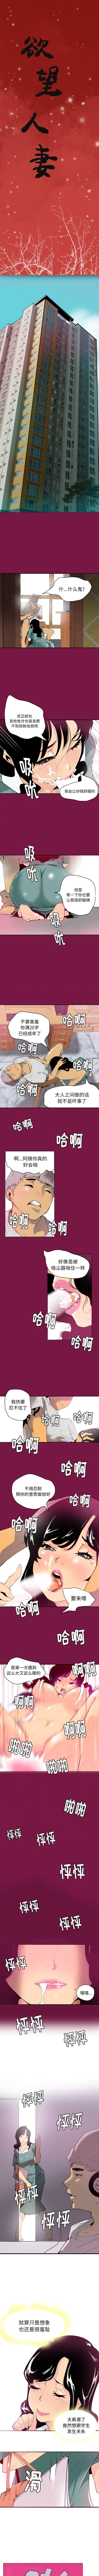 Best Blowjobs Ever 慾望人妻 1-40 Punk - Page 7